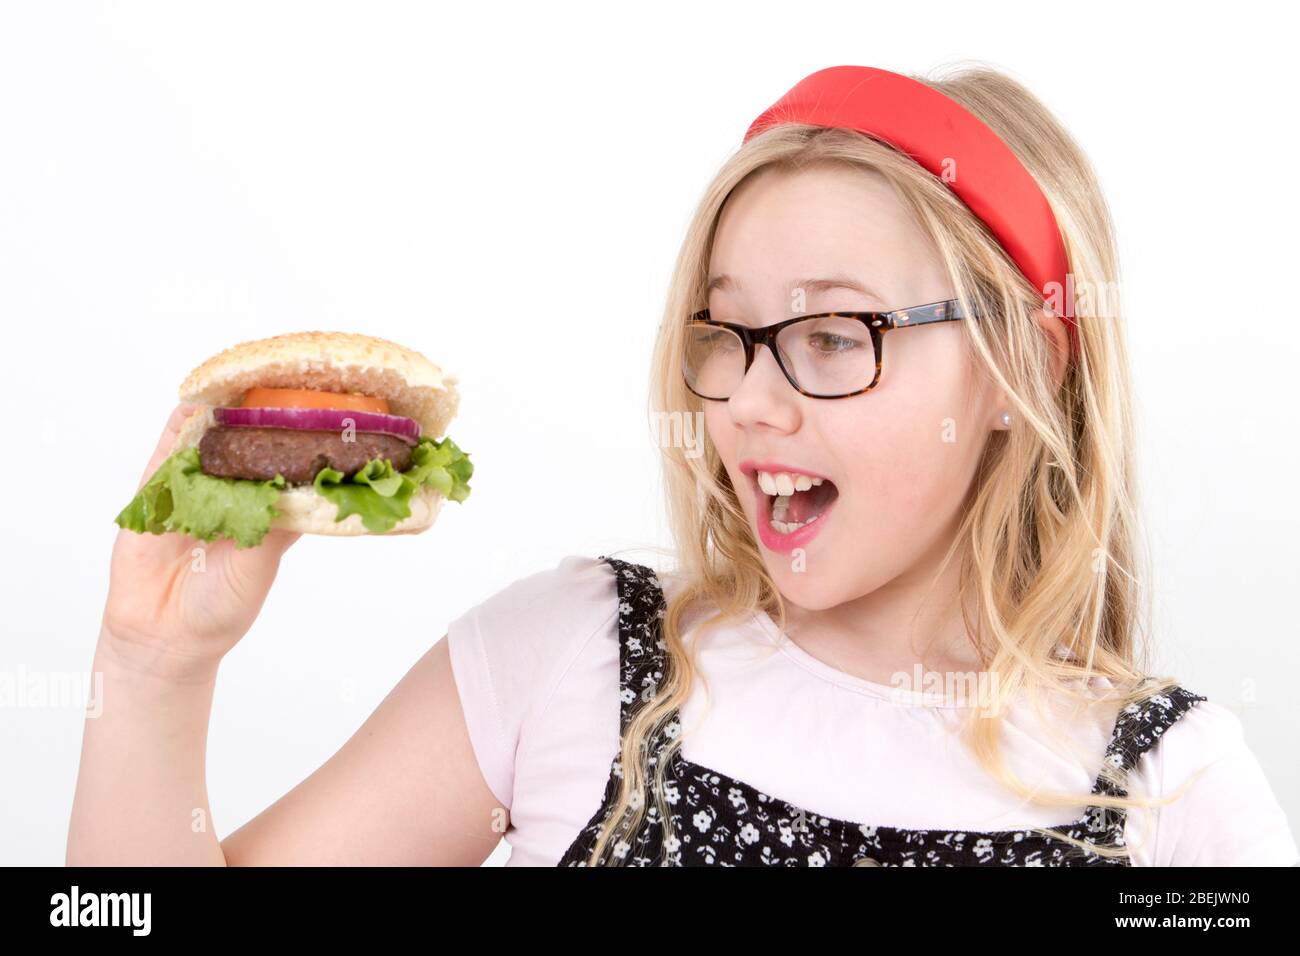 Young blonde girl wearing glasses in a red Alice band holding a homemade burger Stock Photo